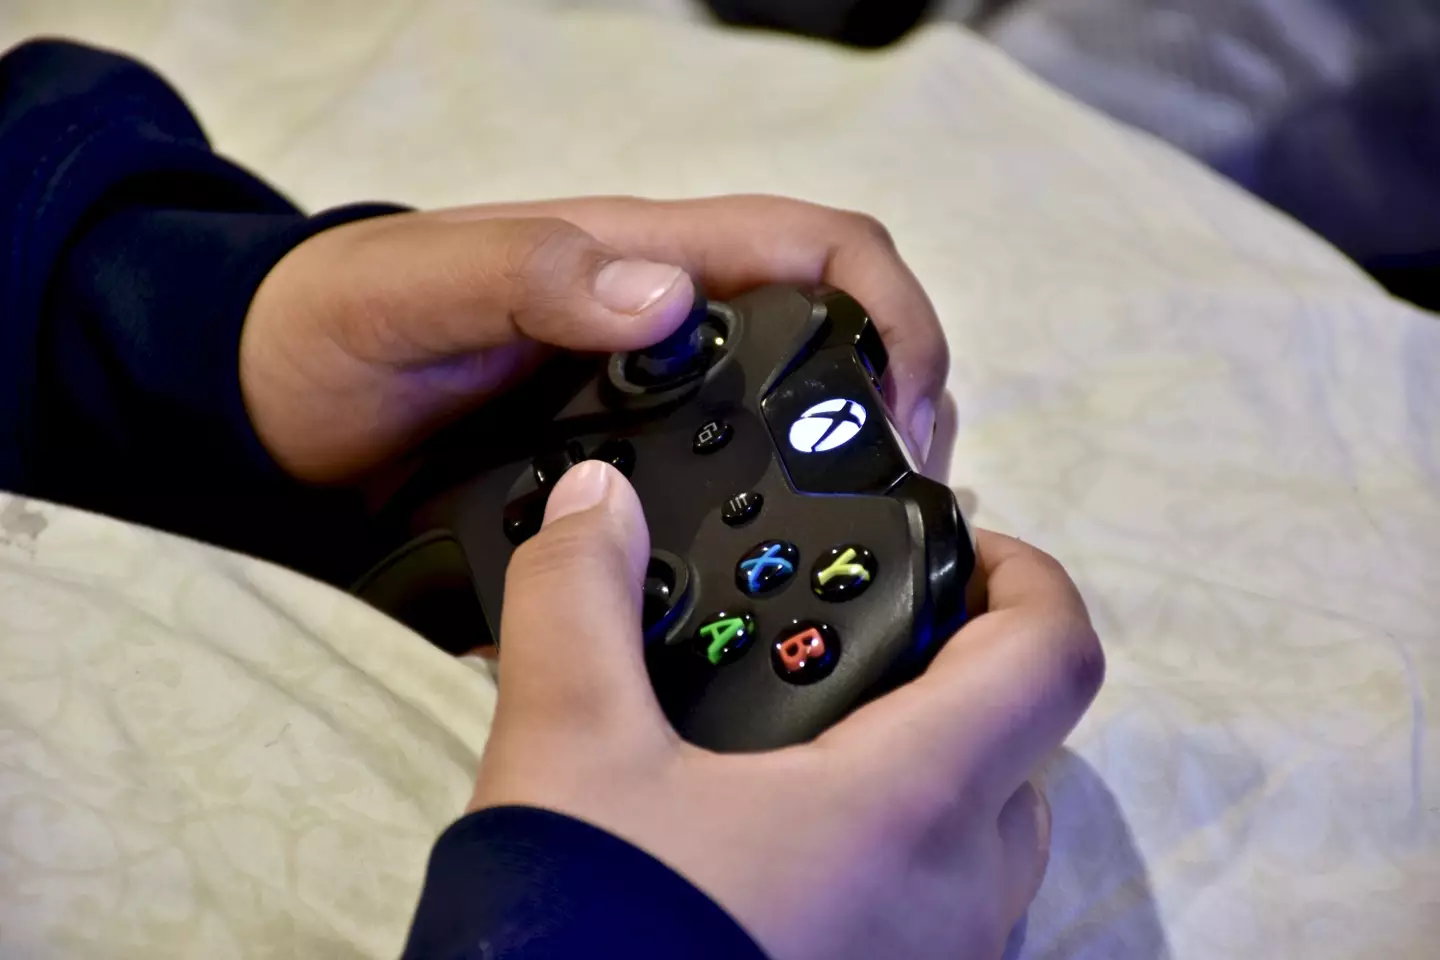 Microsoft has confirmed it has stopped making all Xbox One consoles.